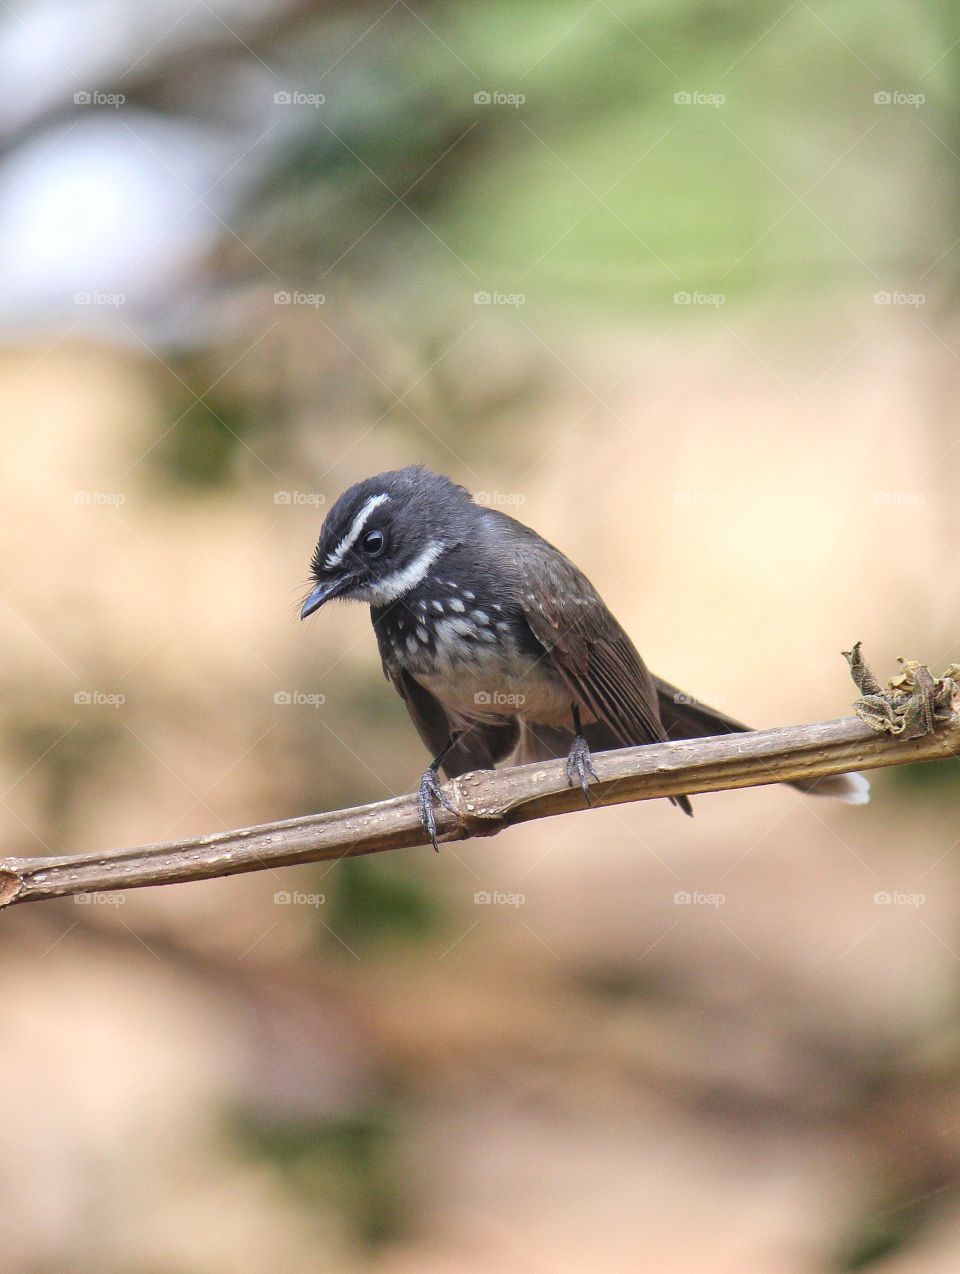 White Throated Fantail Flycatcher sitting on steam